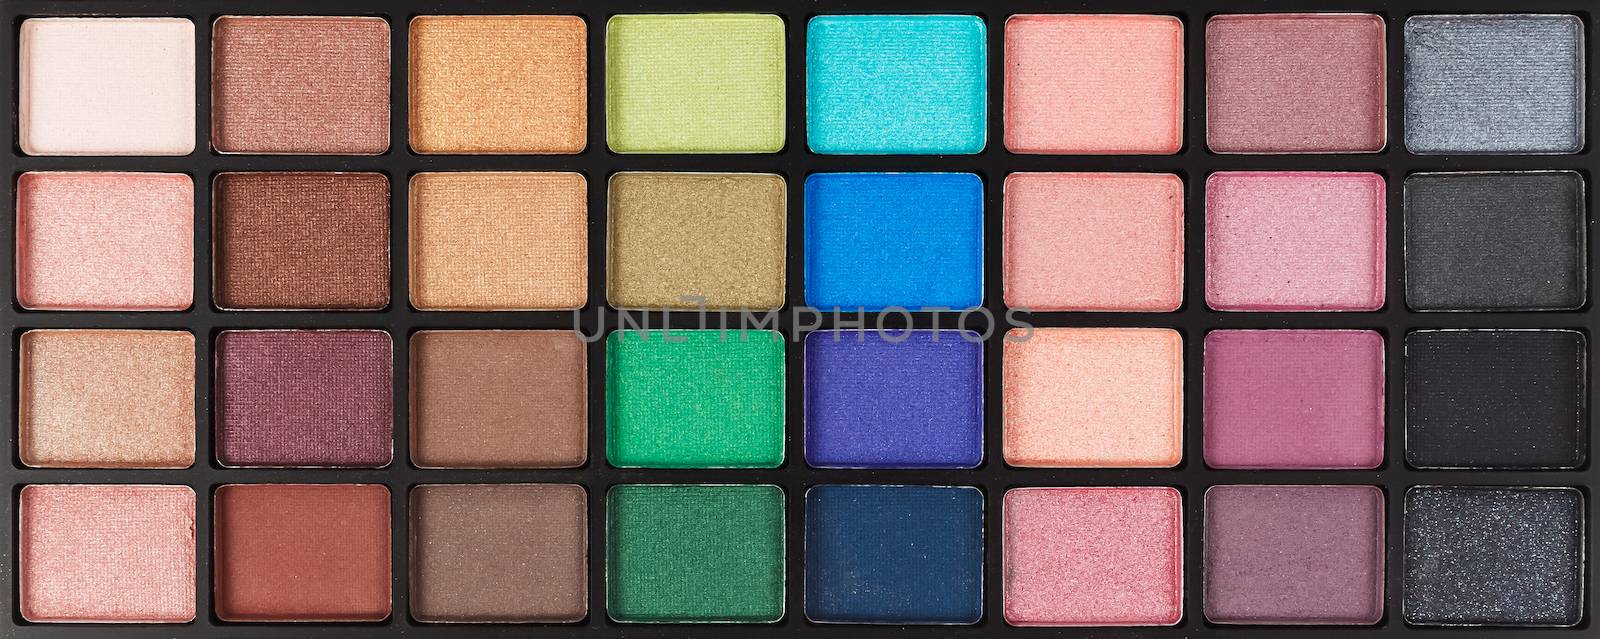 colorful cosmetic eyeshadow palette set and makeup by FrameAngel